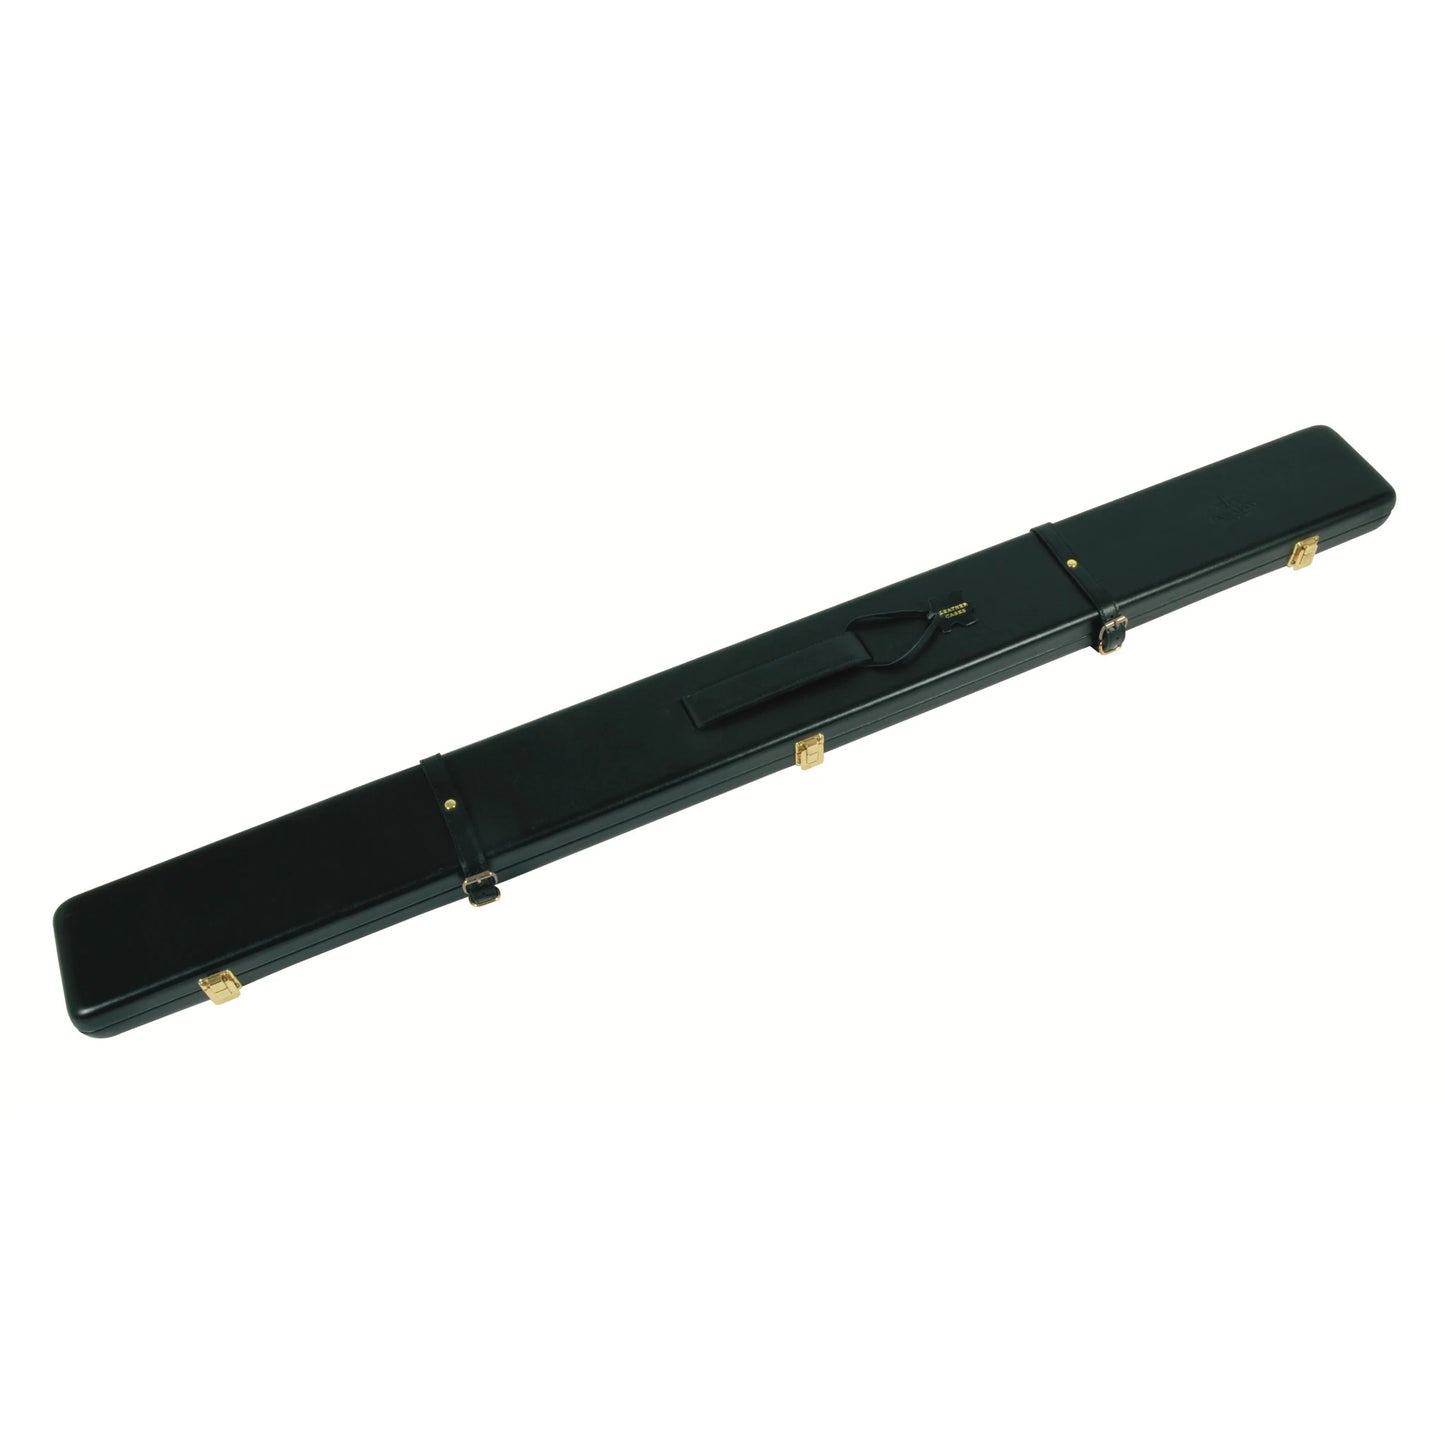 Peradon Leather Black Snooker Cue Case for 3/4 Jointed Cues